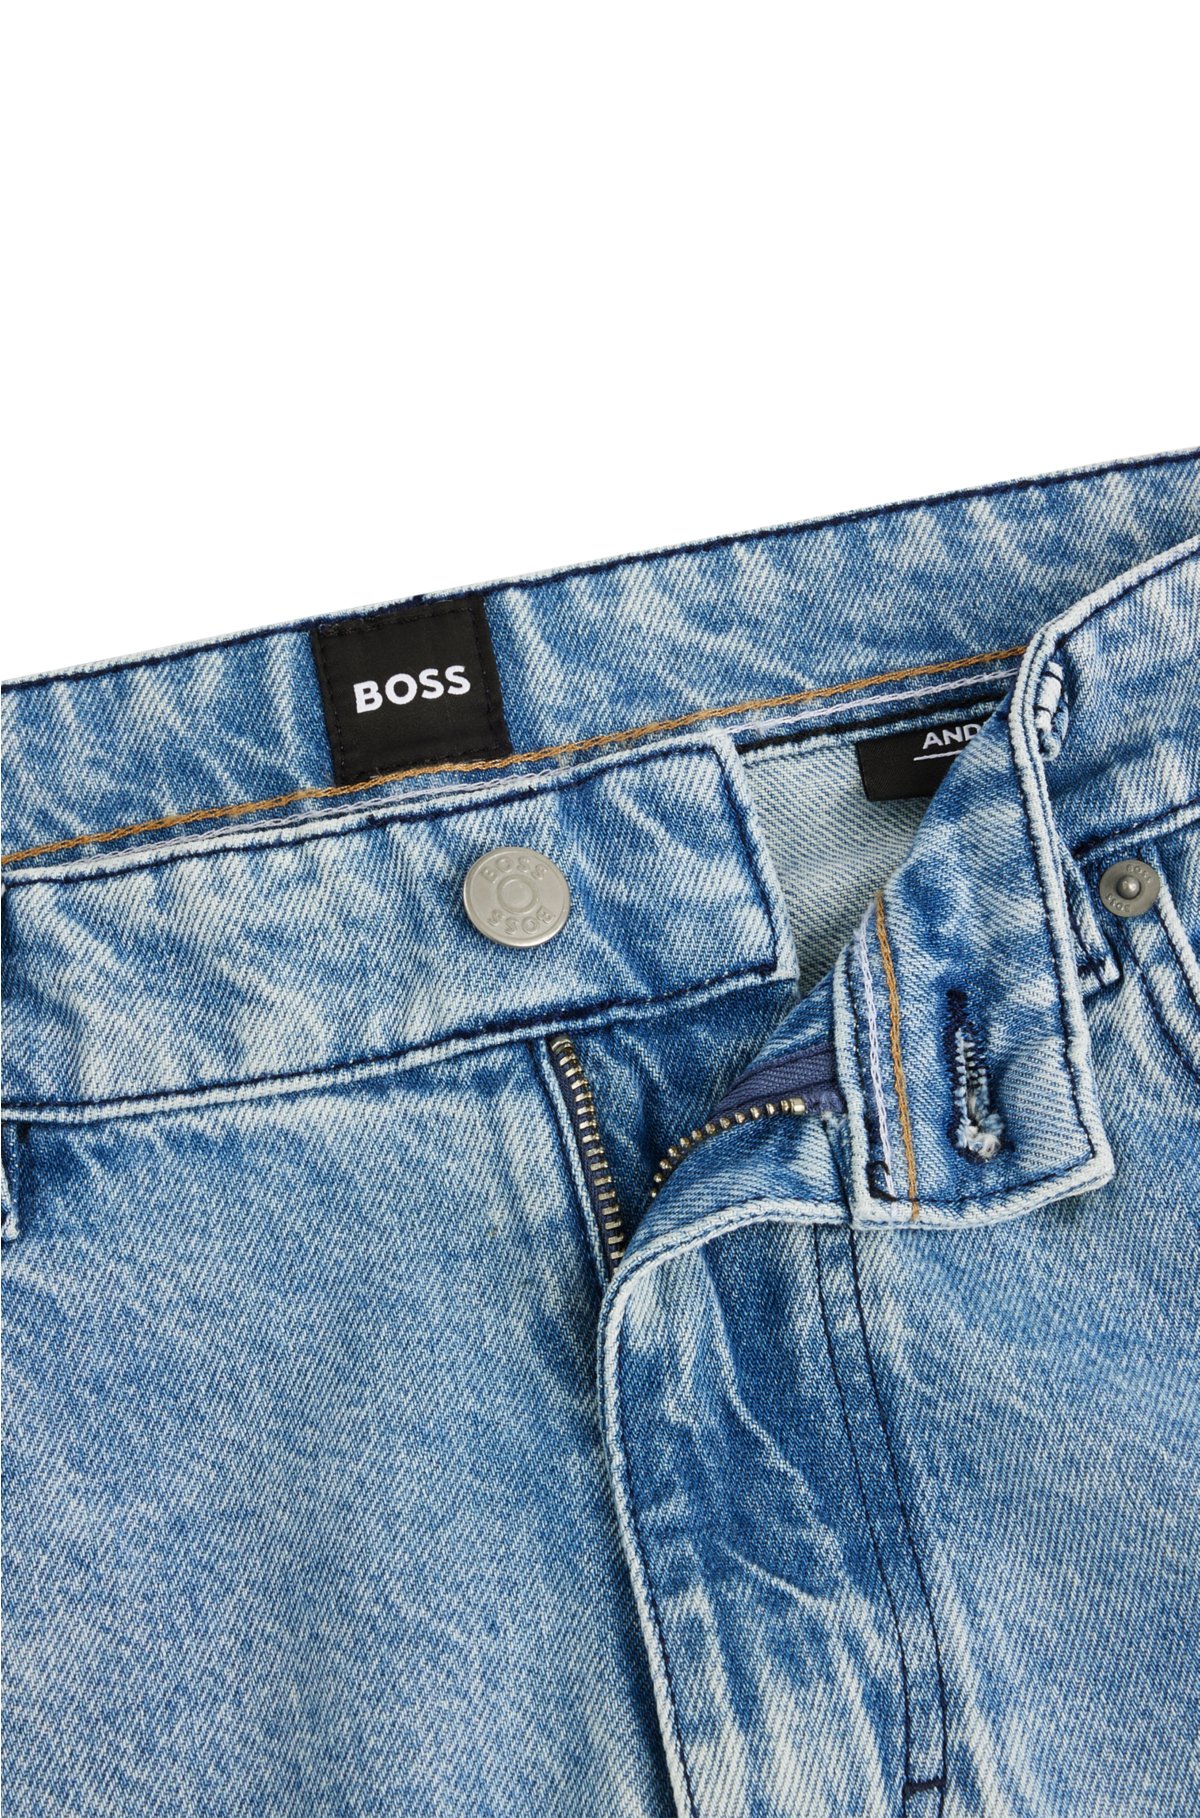 Relaxed-fit jeans in blue stonewashed rigid denim, Blue